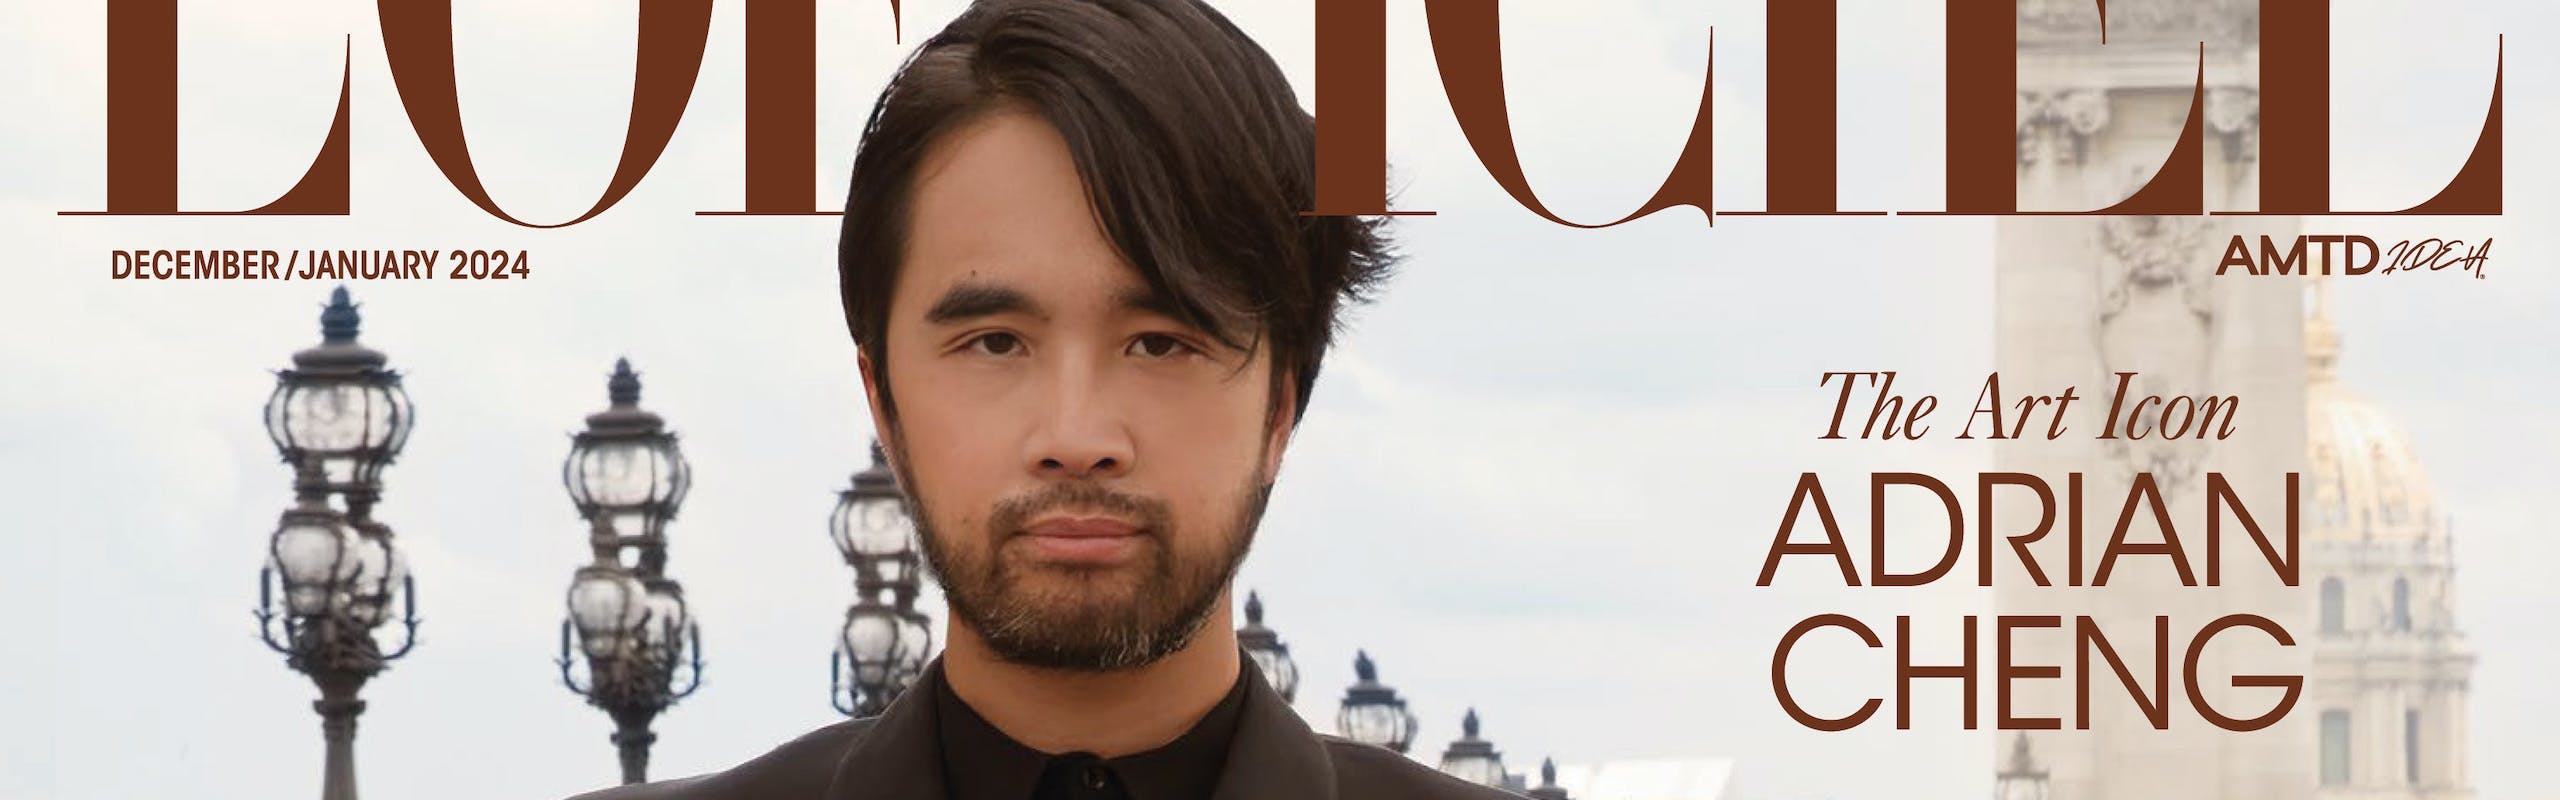 L'OFFICIEL USA December/January 2024 - Adrian Cheng Cover